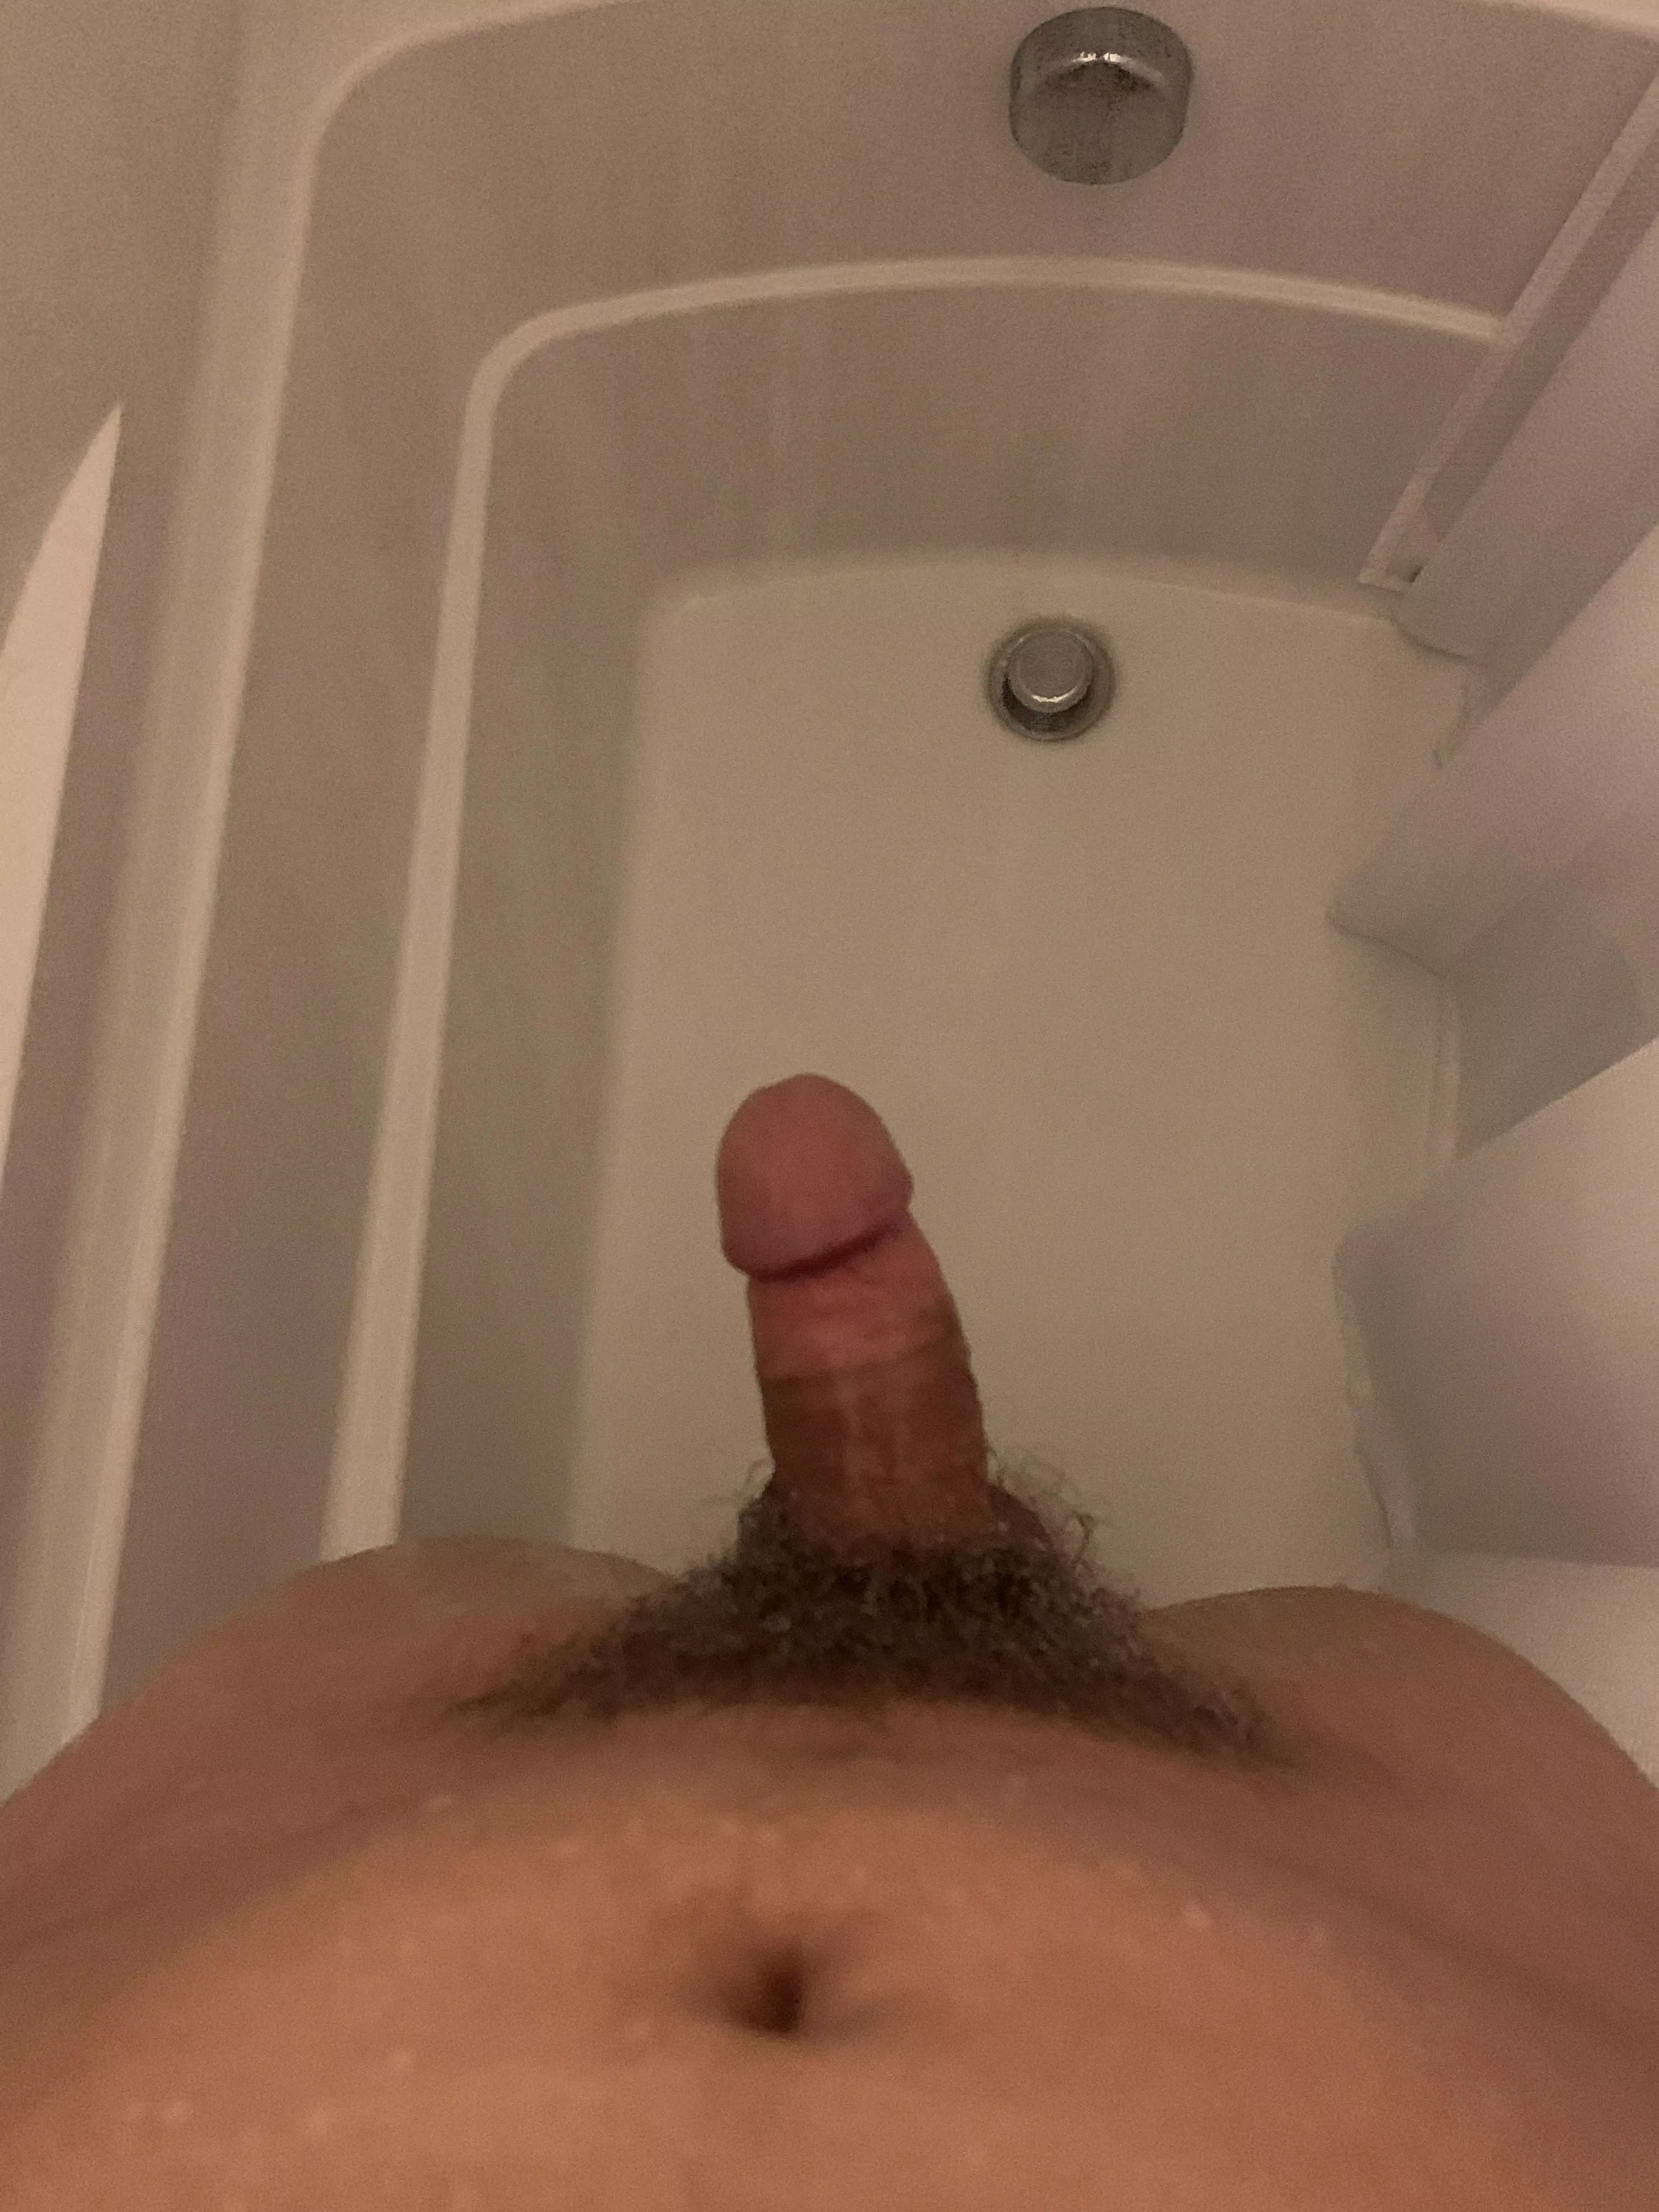 Dick Pics In The Shower